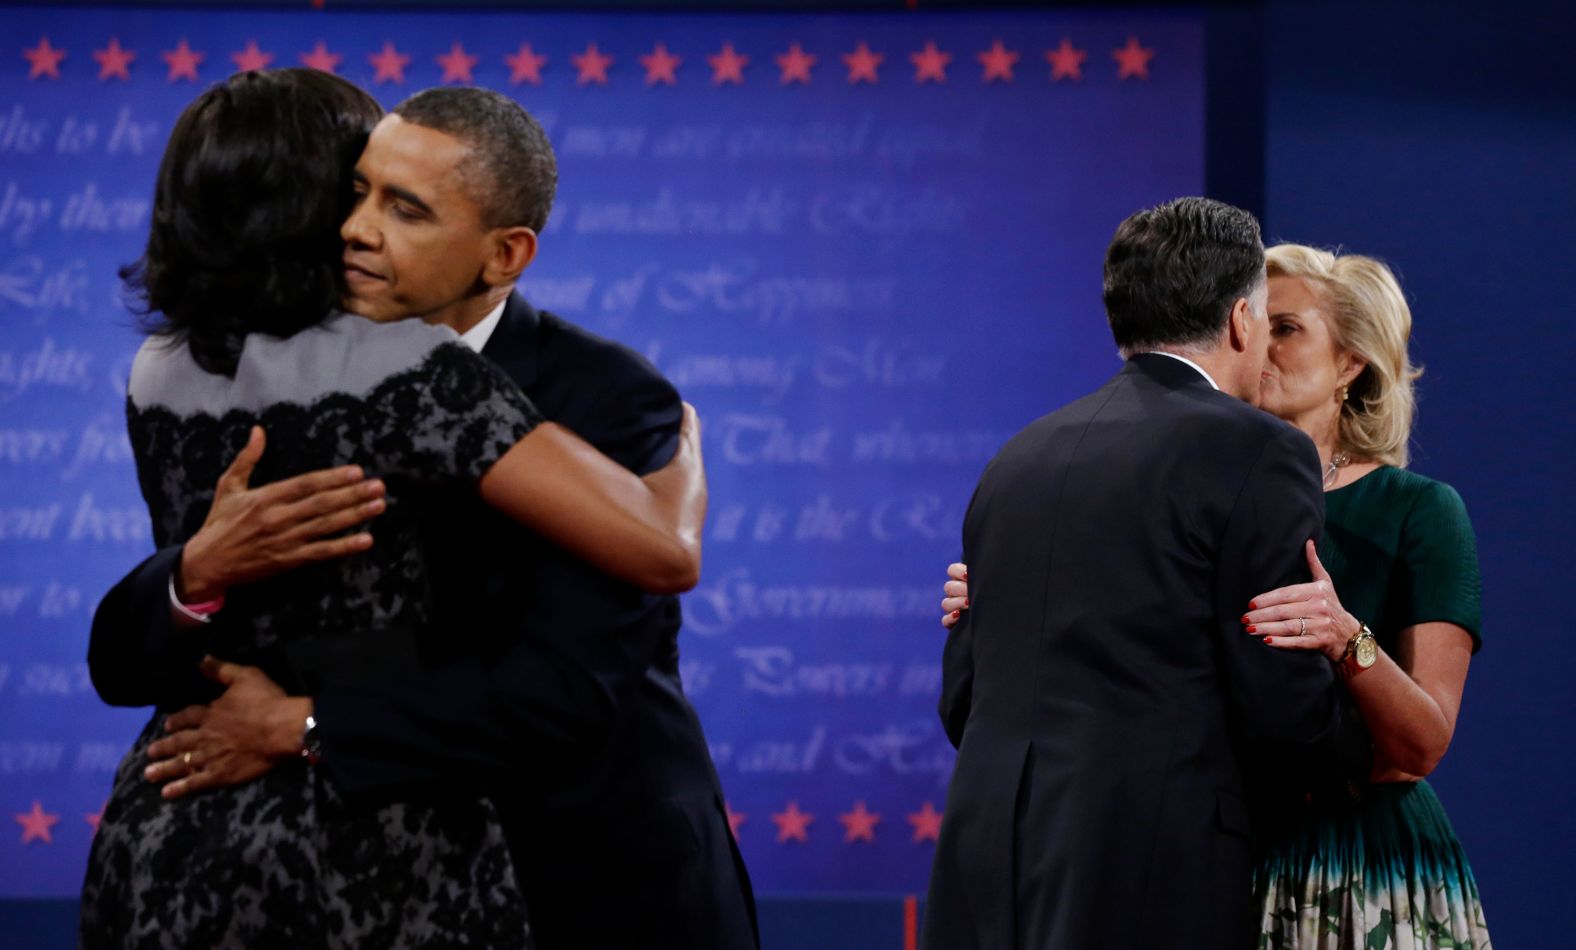 Obama hugs his wife, Michelle, as Romney kisses his wife, Ann, after their third presidential debate in 2012.